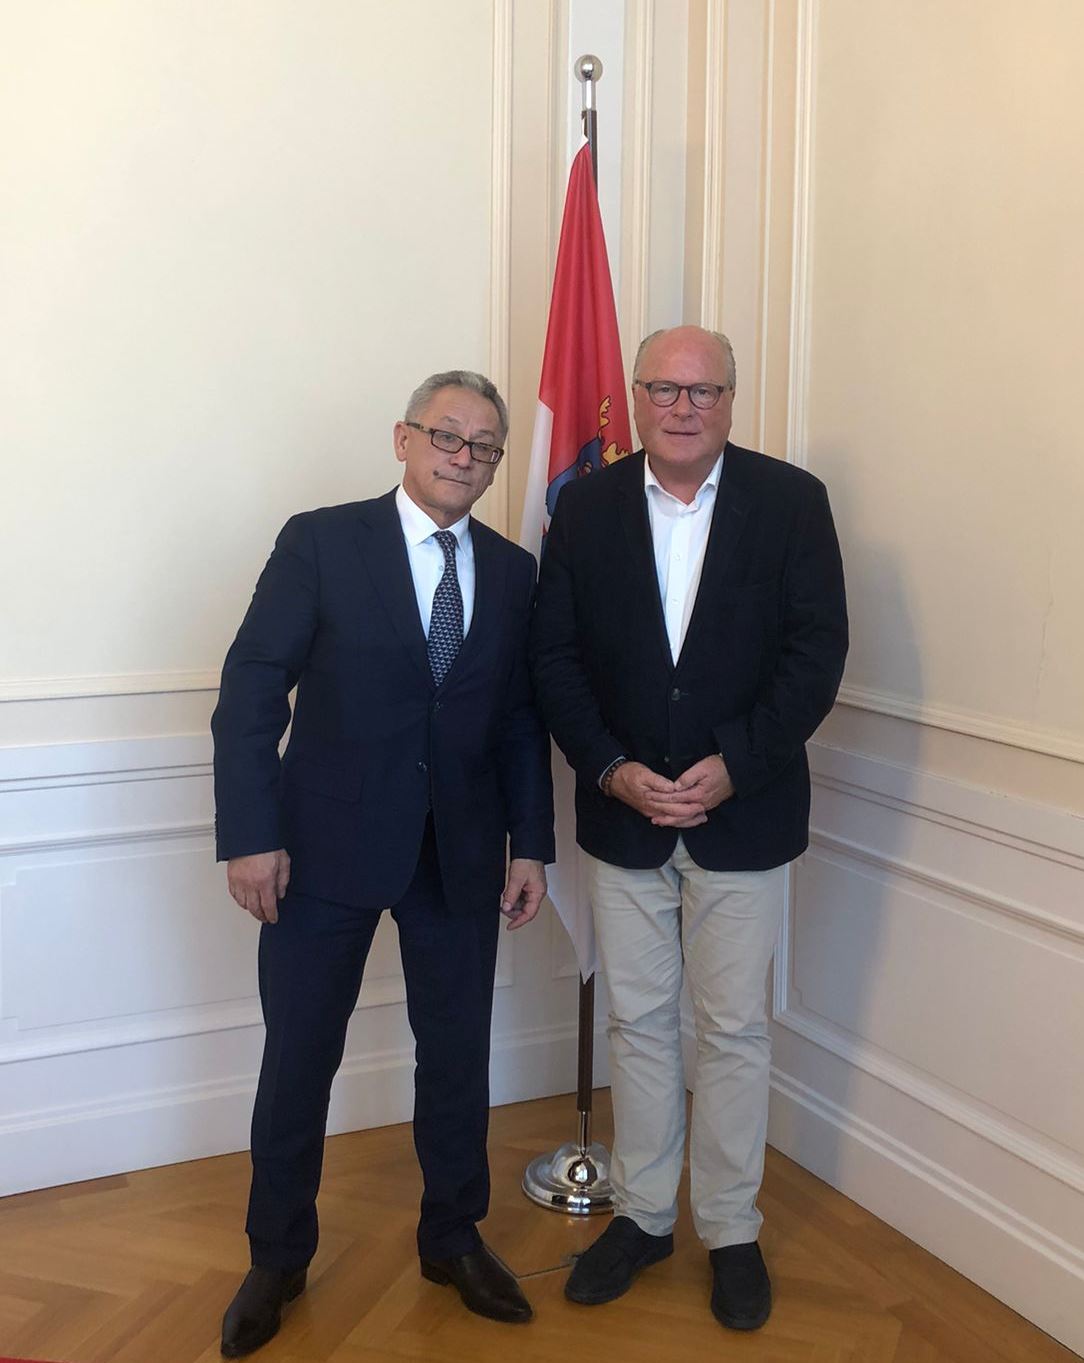 The Consul General of the Republic of Kazakhstan in Frankfurt am Main Mr. Taubaldy Umbetbaev met with the Chief of Protocol of the Hessian State Chancellery Mr. Dieter Beine